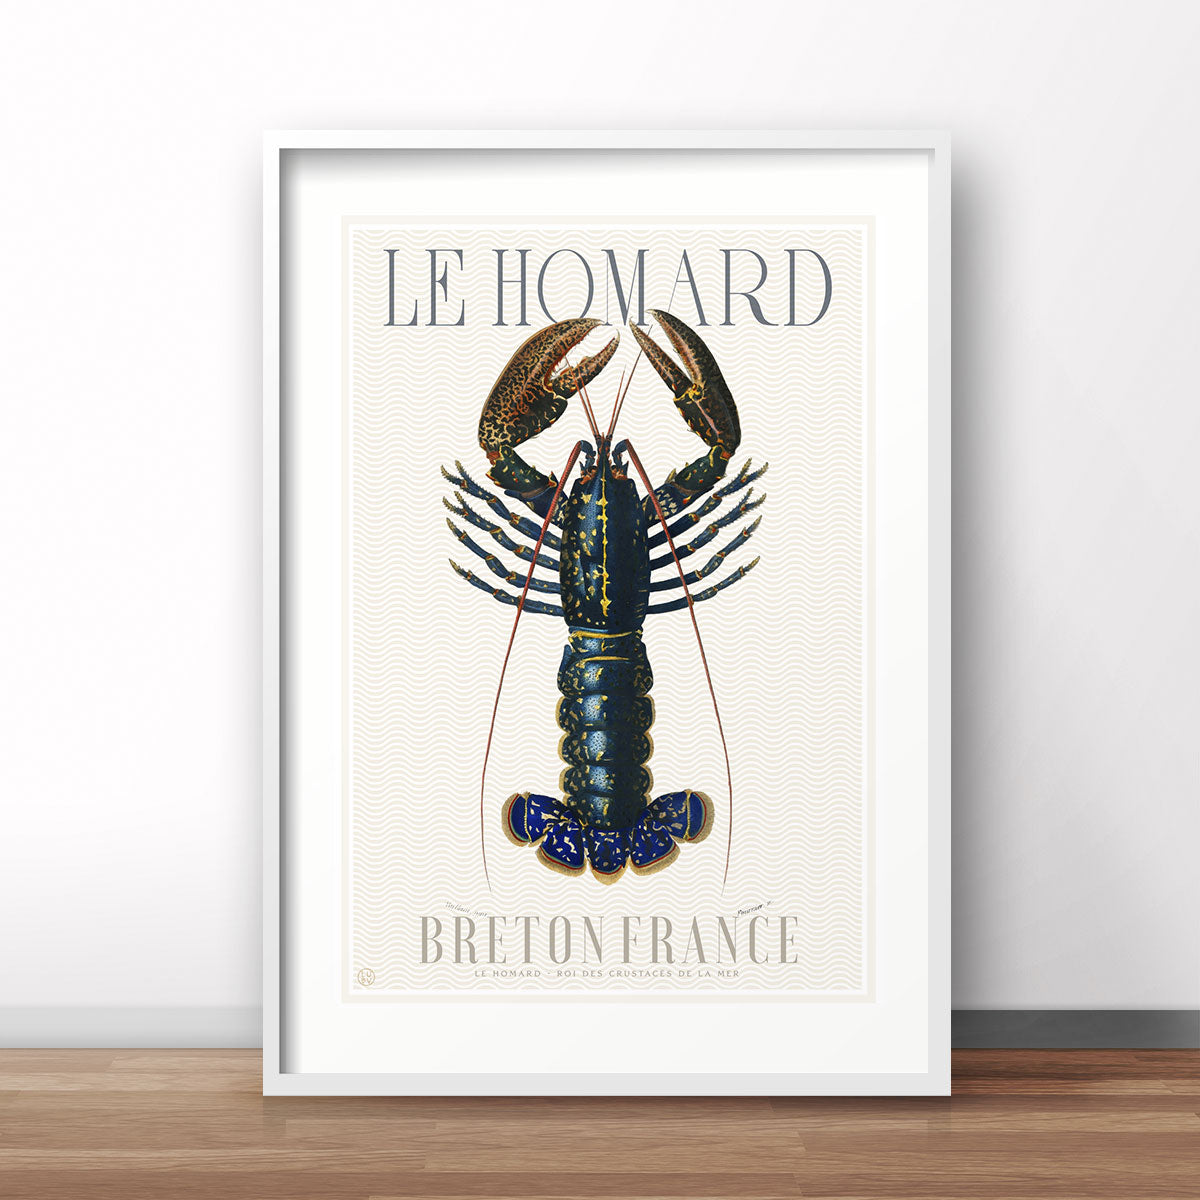 Le homard France retro vintage travel poster print from Places We Luv